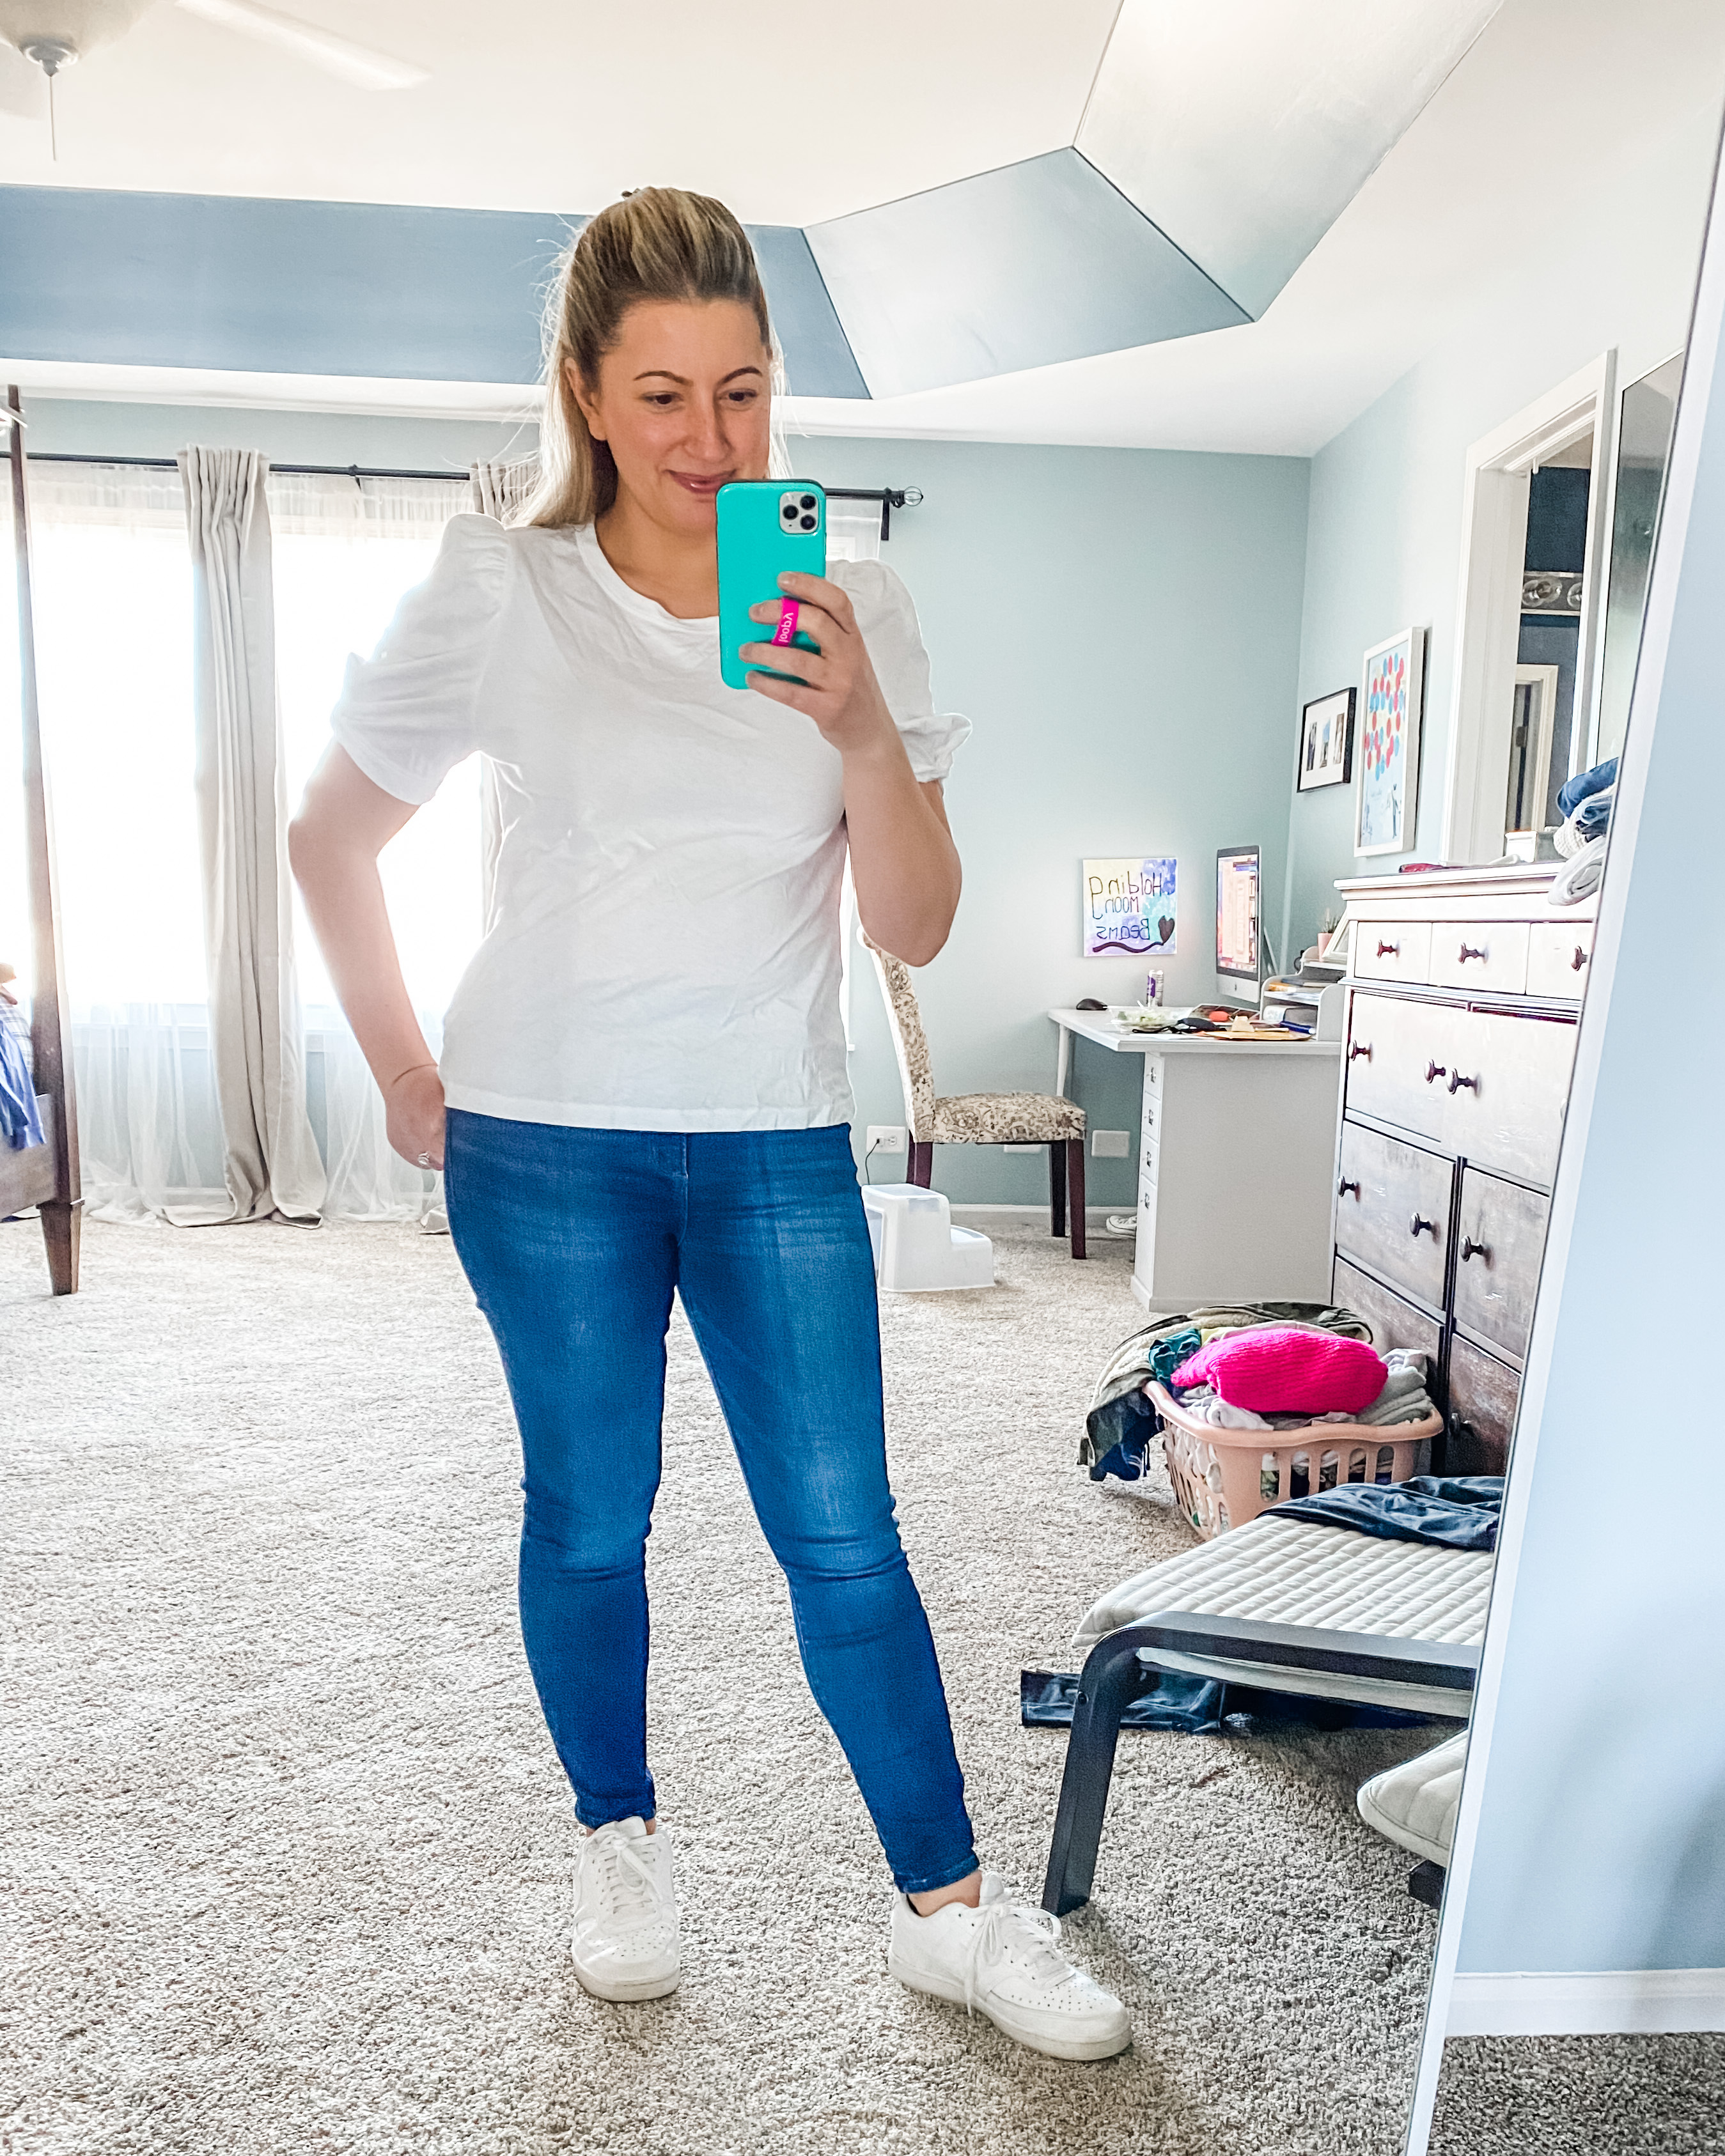 A young female in her 30s is standing in her bedroom with a messy background of furniture and clothes. She has blonde hair pulled back, is wearing a puff sleeved T-shirt that is white. Medium wash blue denim jeans, and Nike white sneakers. She is holding her phone in one hand and the other hand is on her hip. She is smiling and looking into the phone. It appears that she’s taking the picture of her self in the mirror. If you click on the picture, it takes you to a link where you can shop the items in the photo.